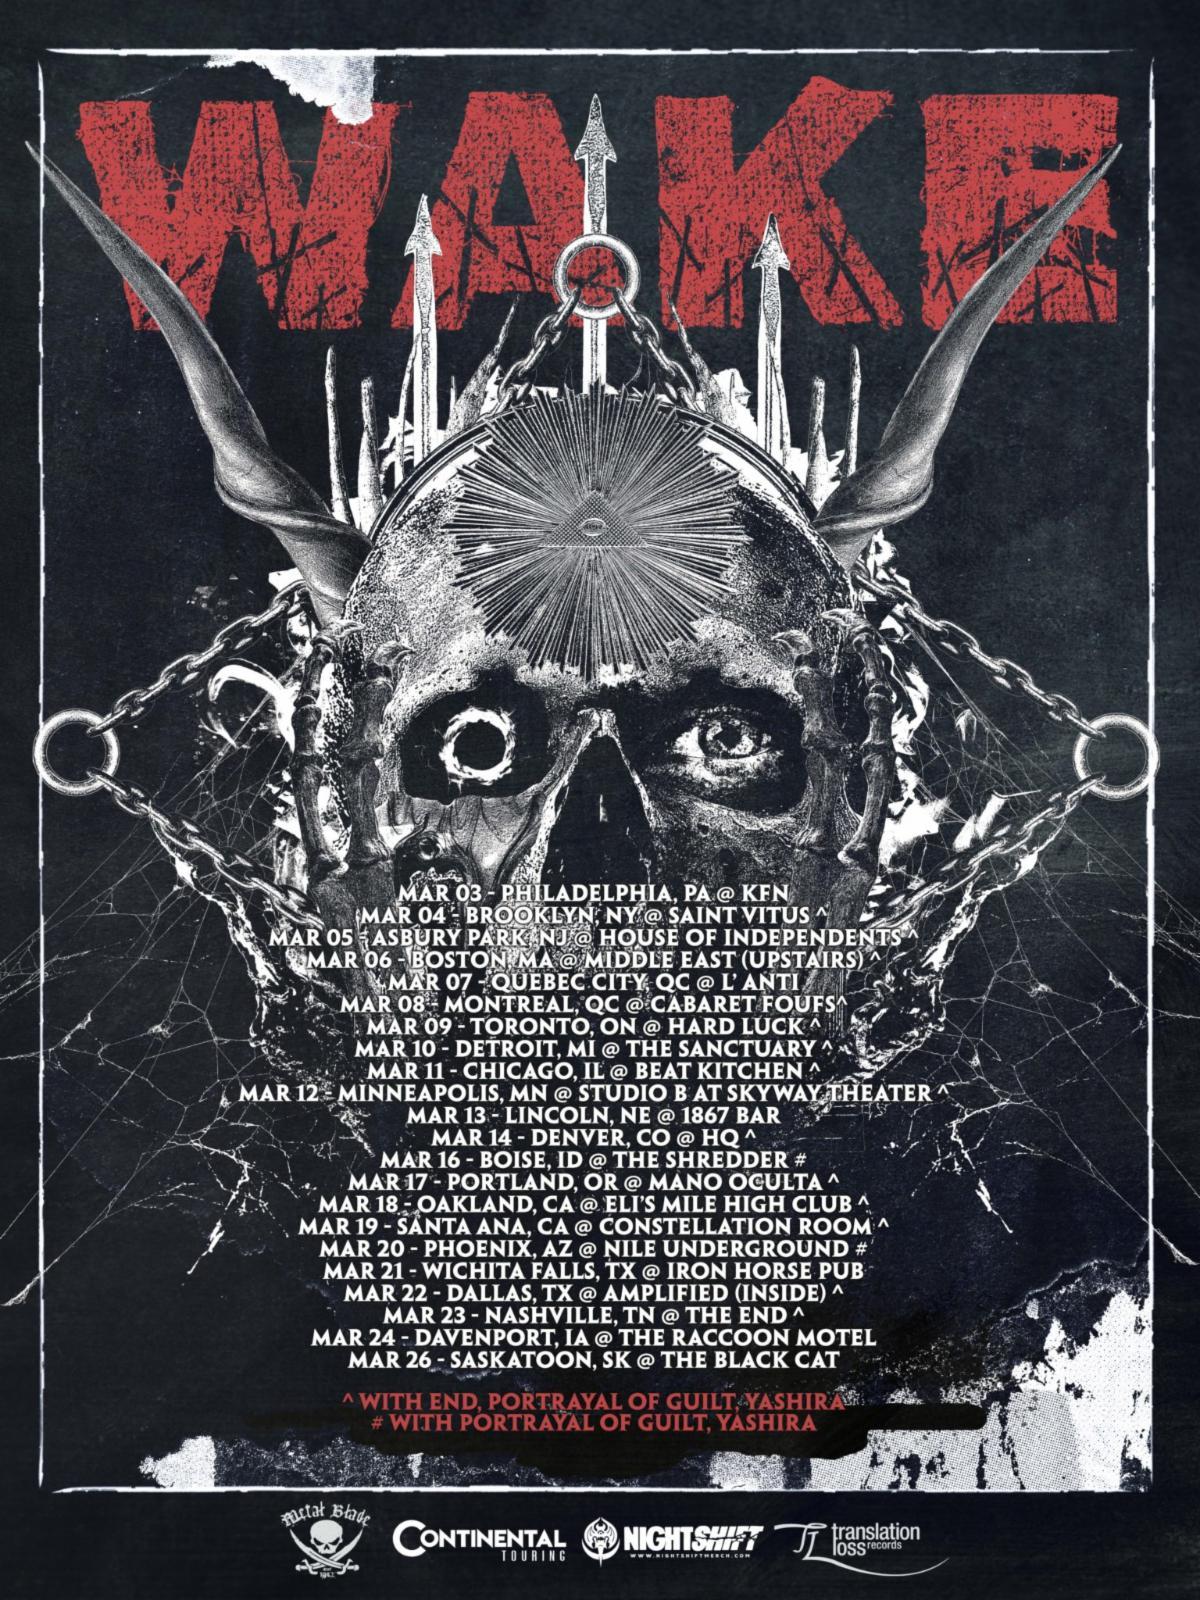 WAKE: Canadian Extreme Metallers Prepare For North American Tour